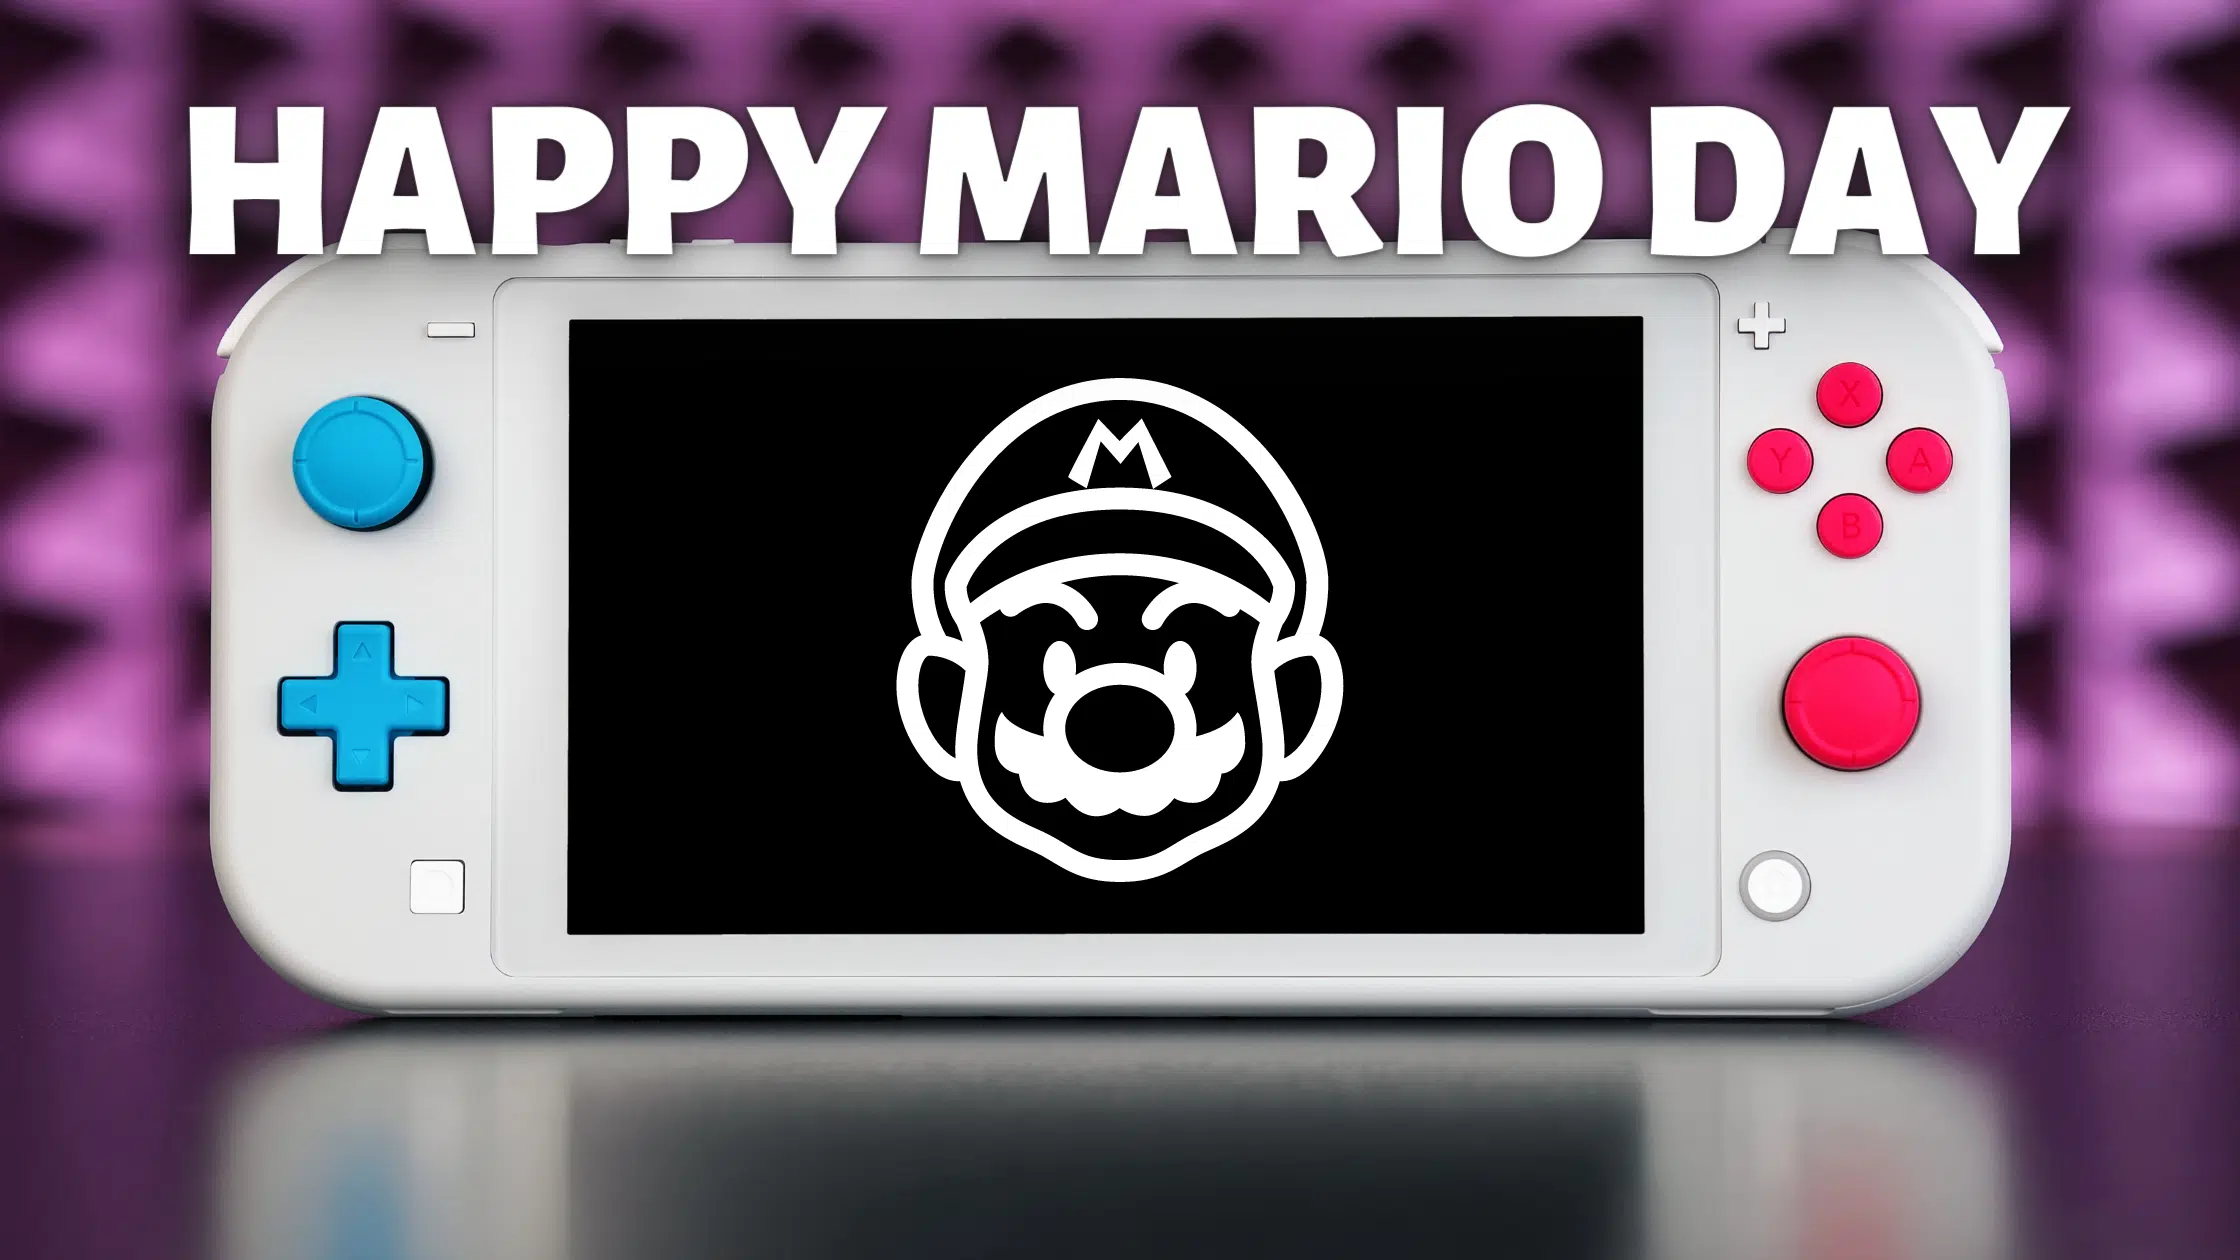 Today is Mario Day! (Mar.10)